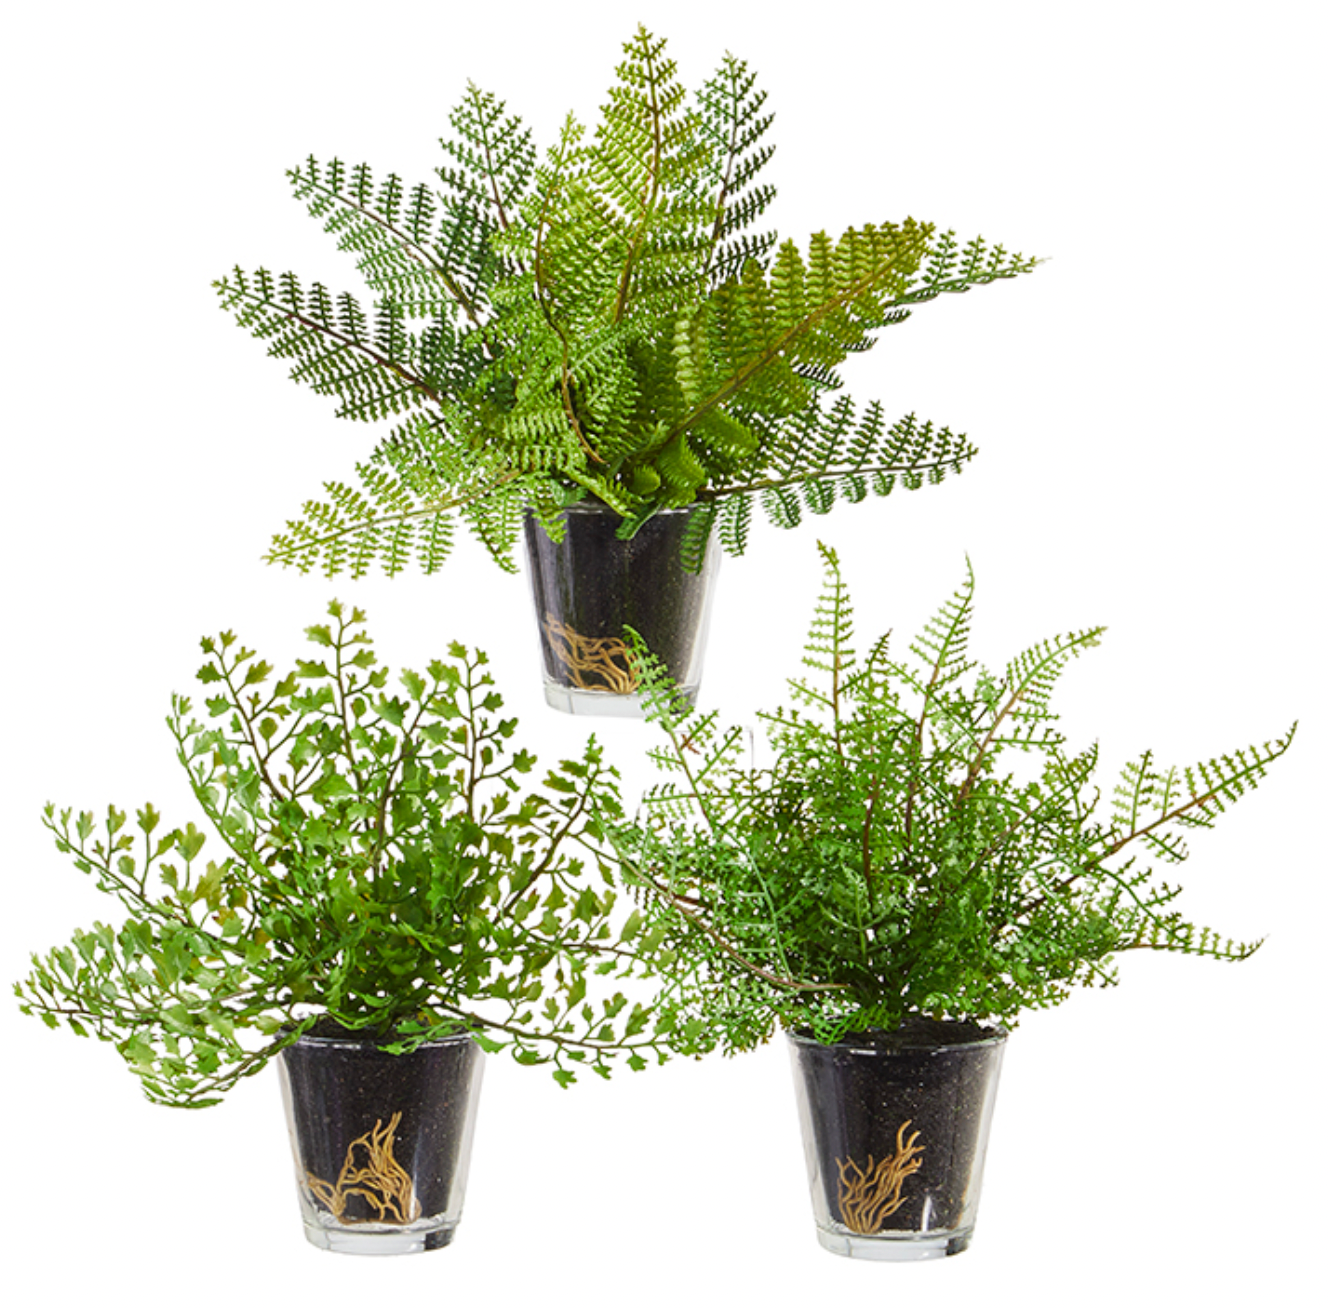 Potted Fern in Glass Vase